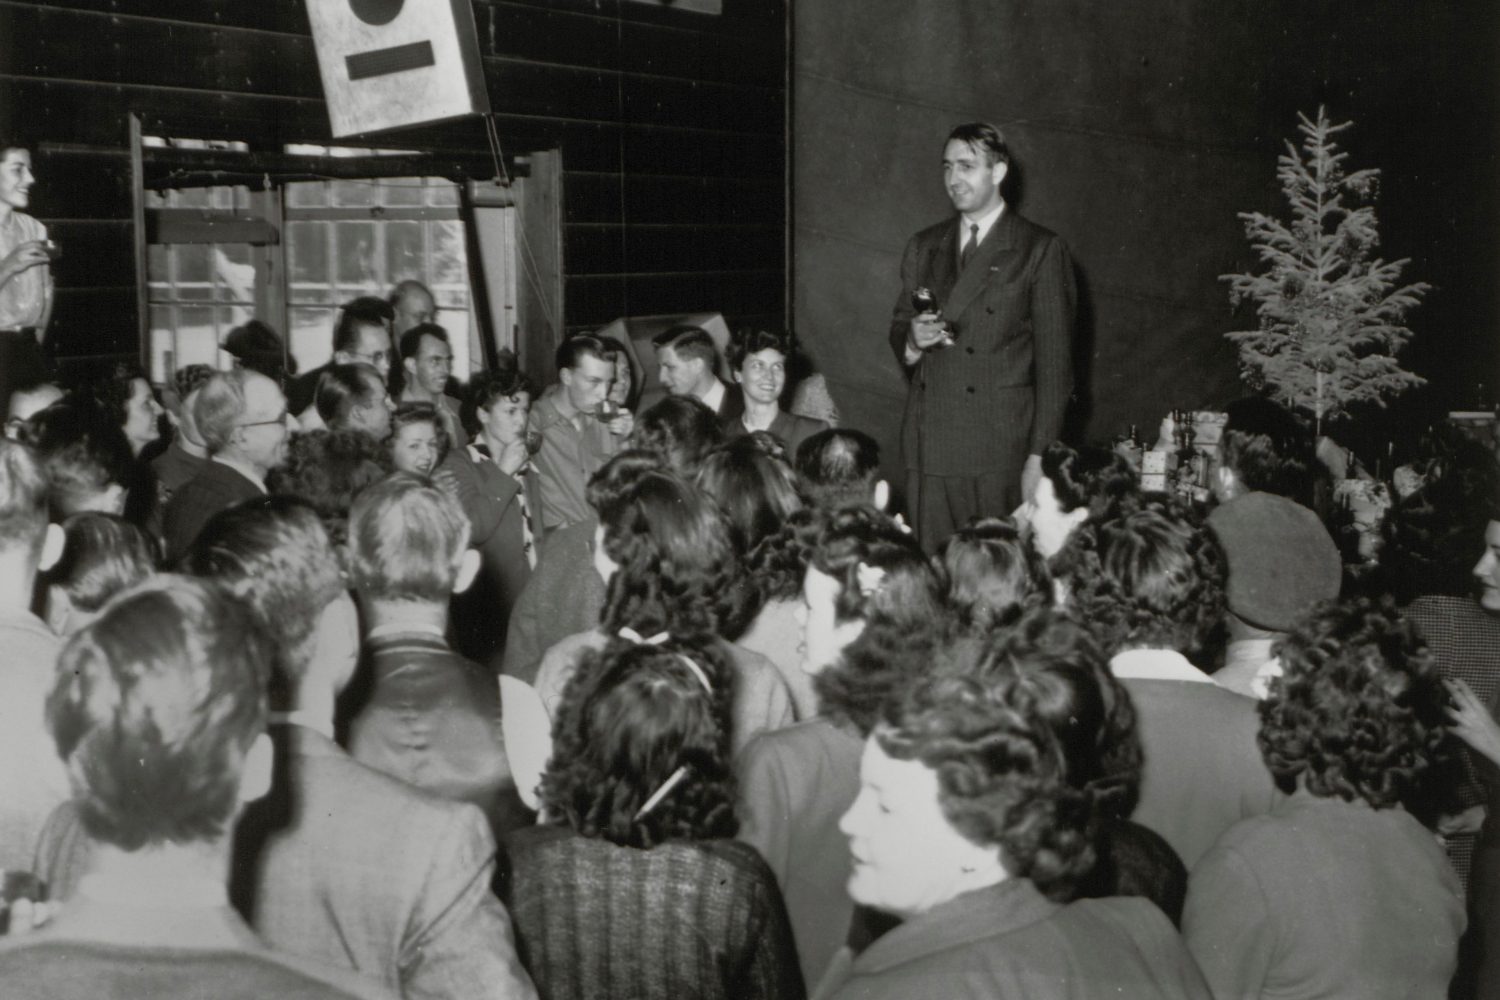 Dave Packard addresses a large crowd at a Hewlett-Packard Christmas party in 1945.